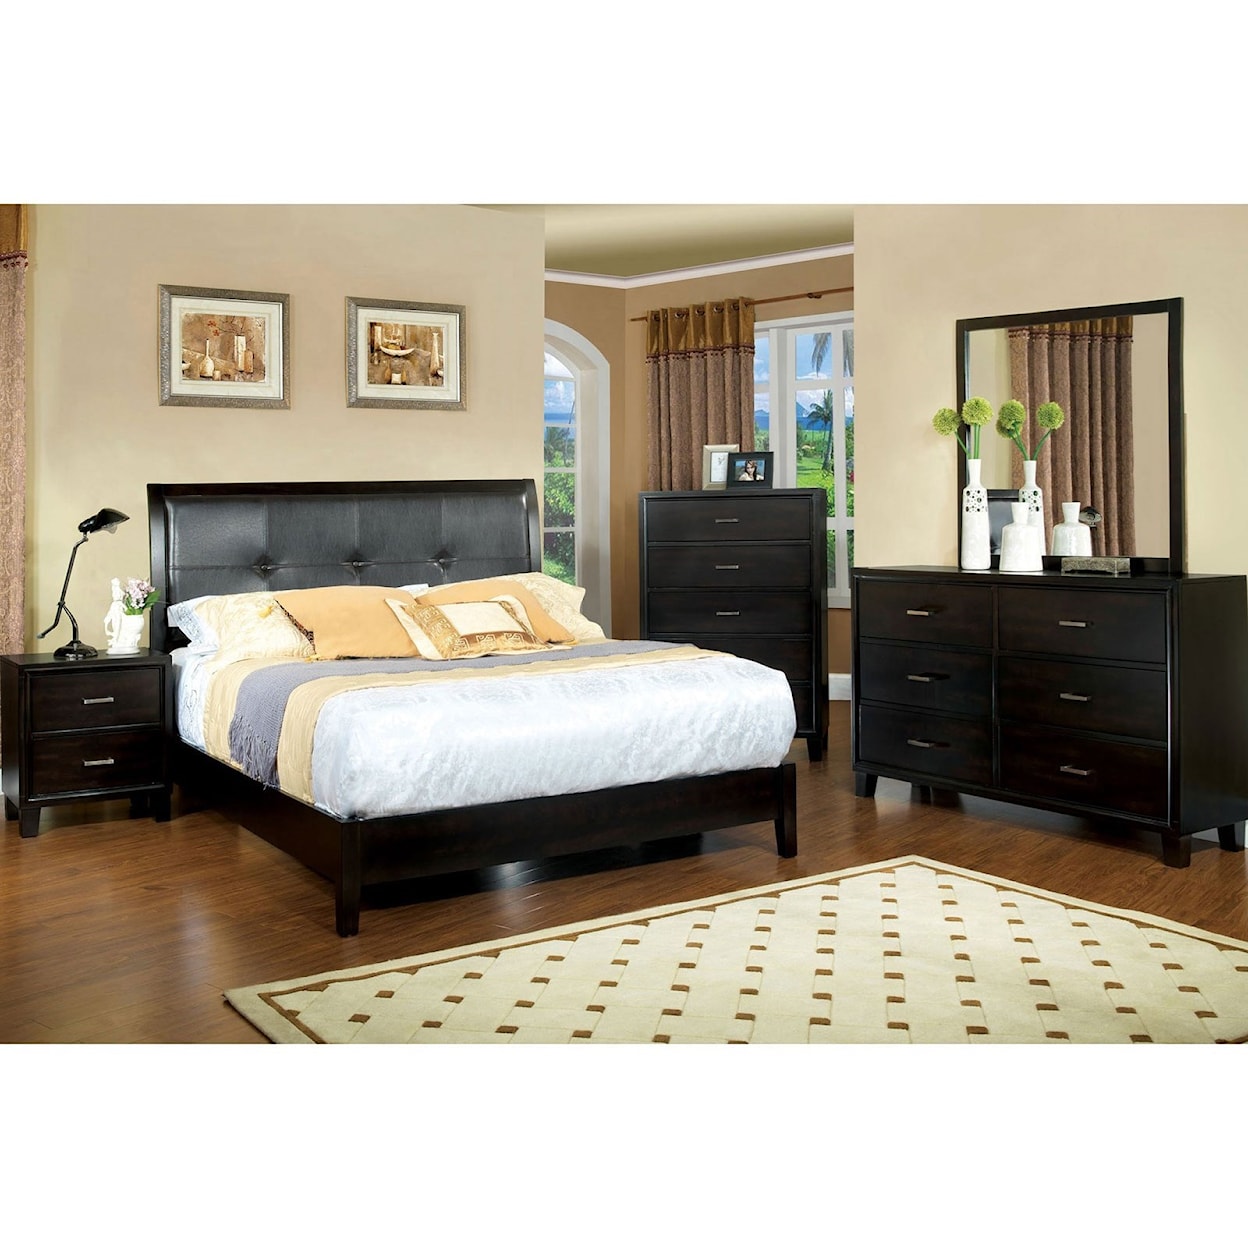 Furniture of America Enrico Queen Bed